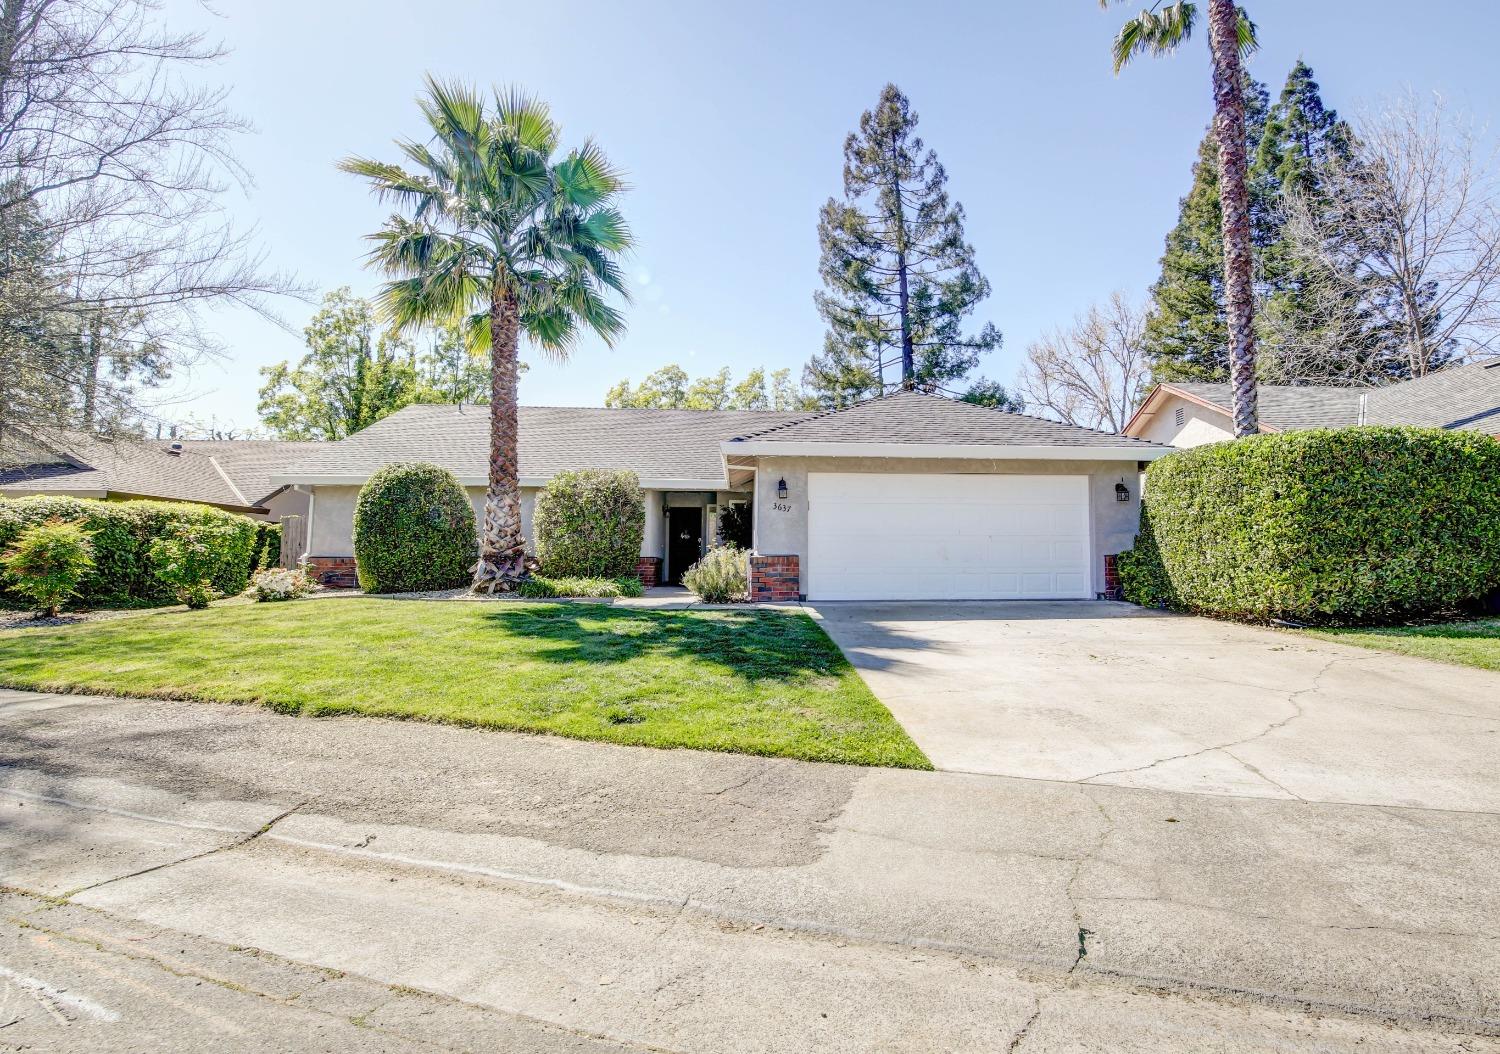 Photo of 3637 Timmco Ct in Carmichael, CA